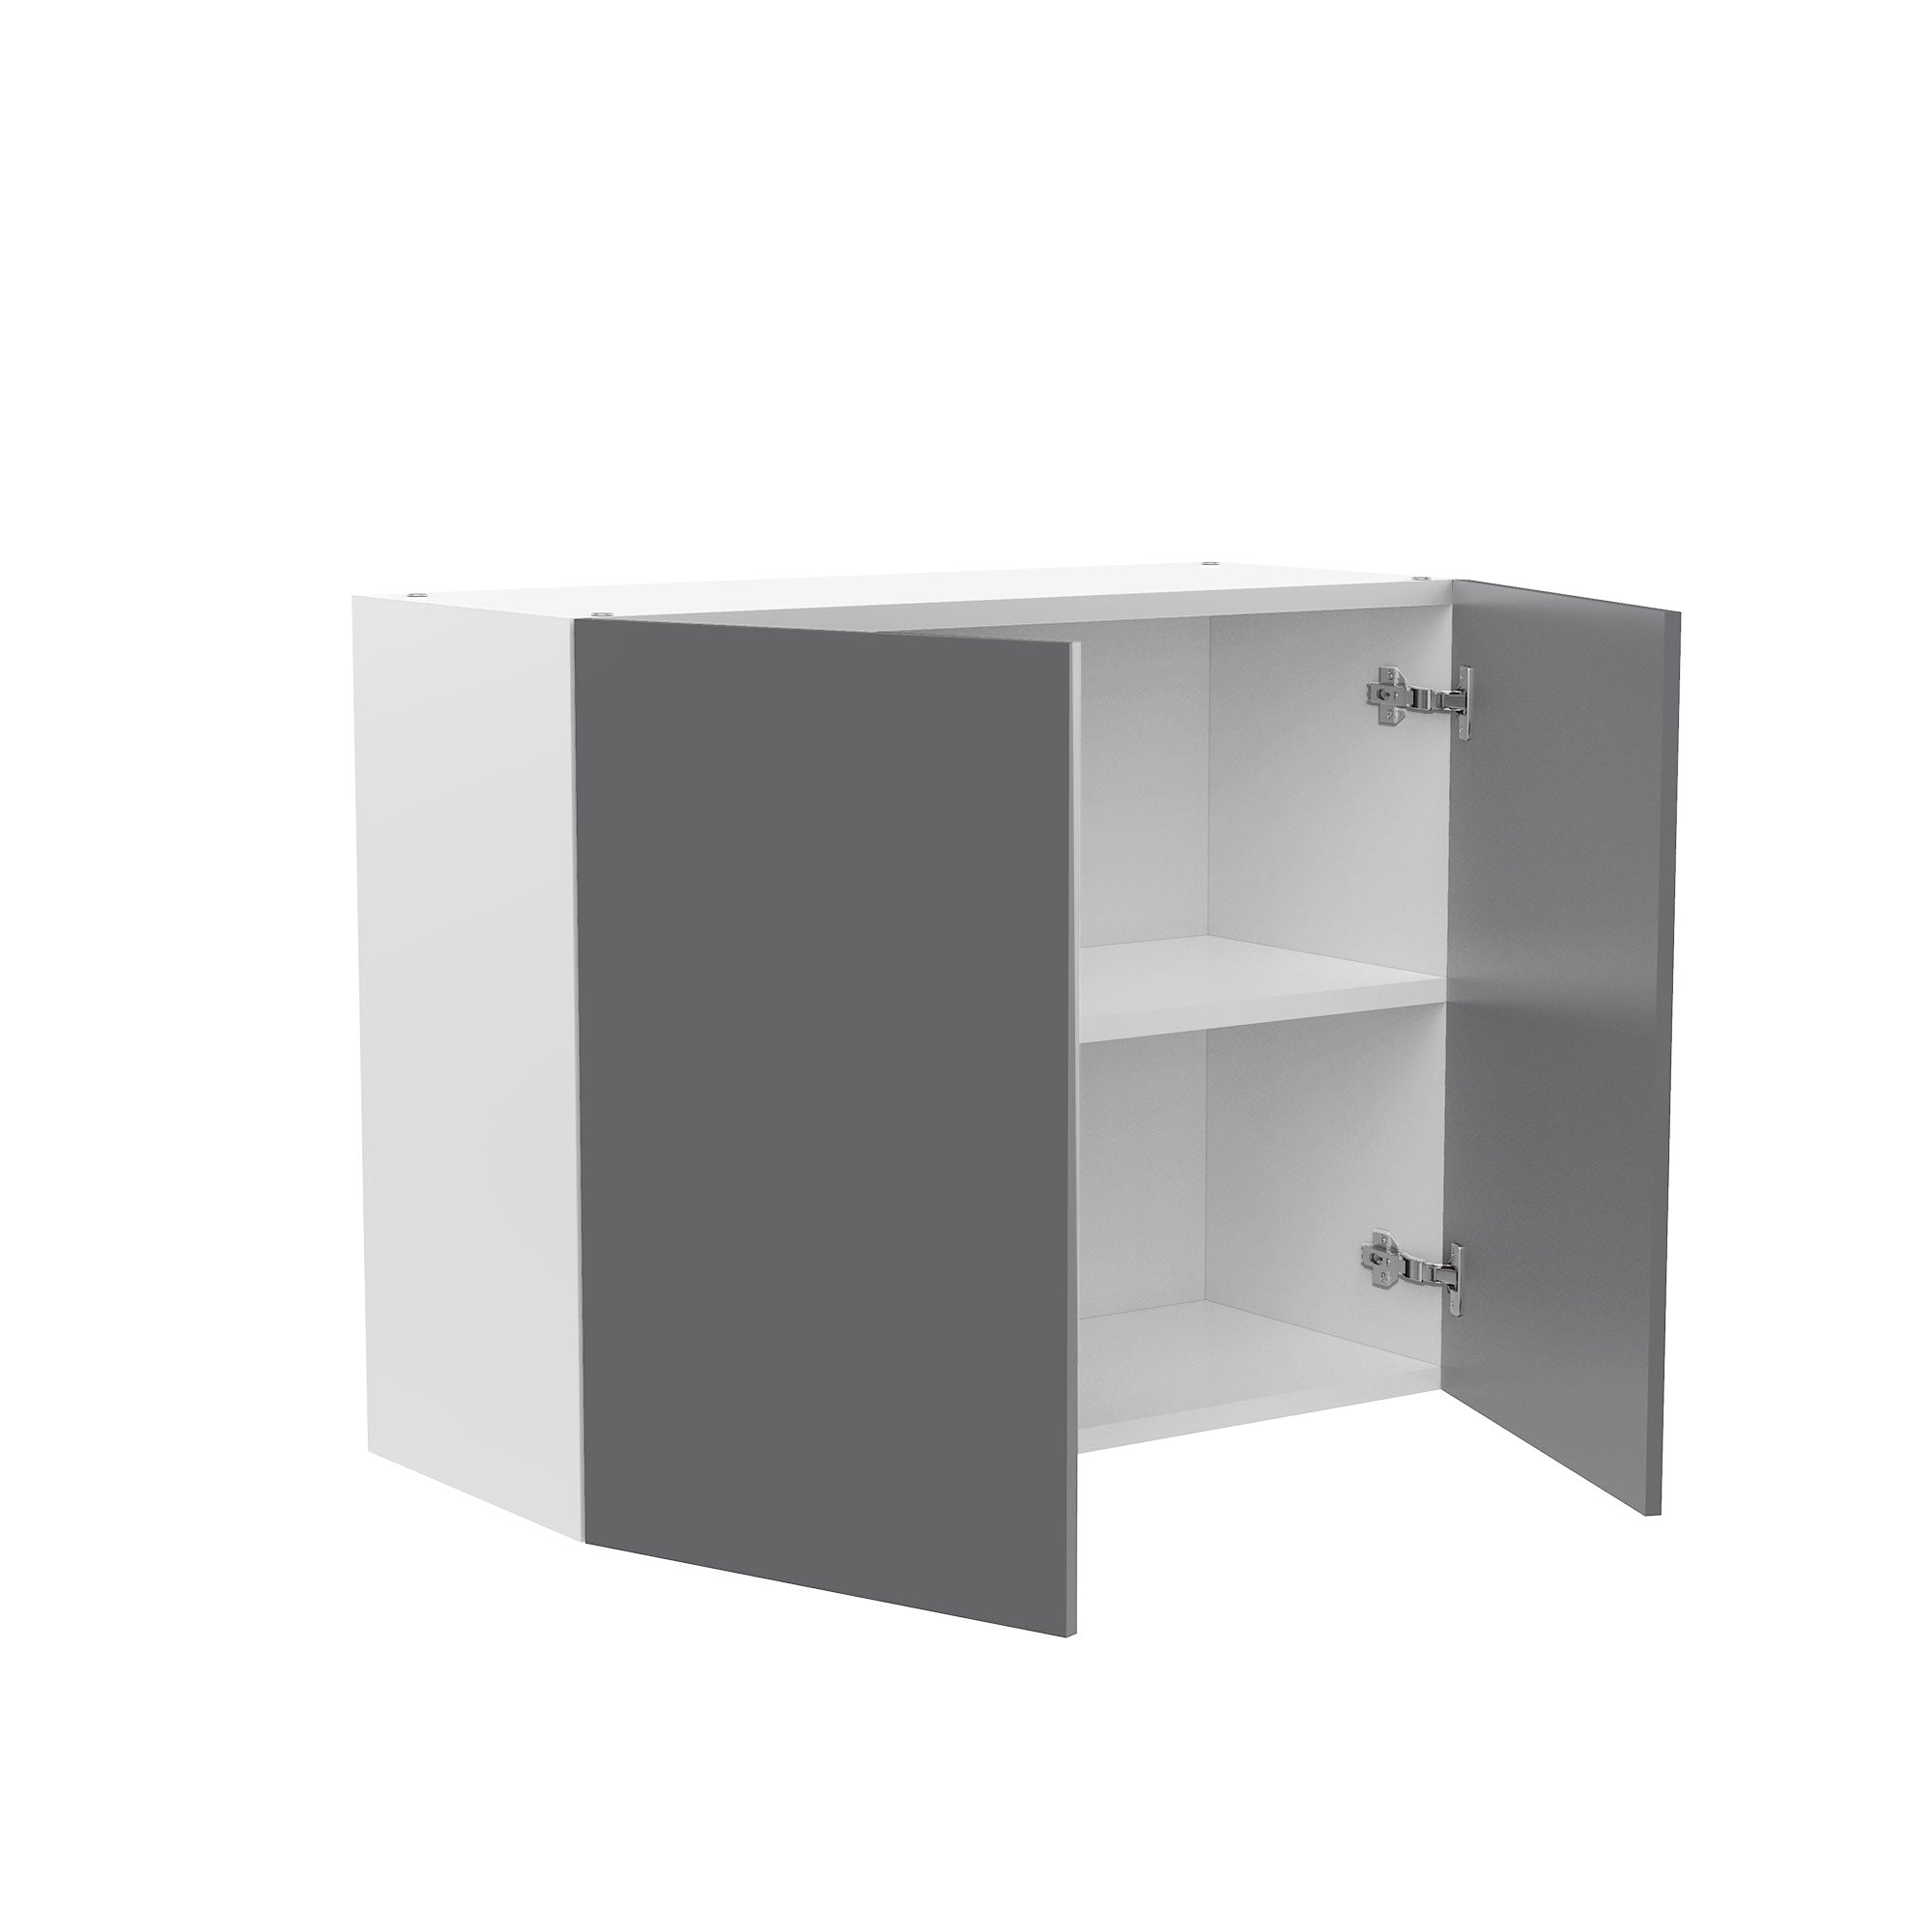 RTA - Glossy Grey - Double Door Wall Cabinets | 33"W x 24"H x 12"D